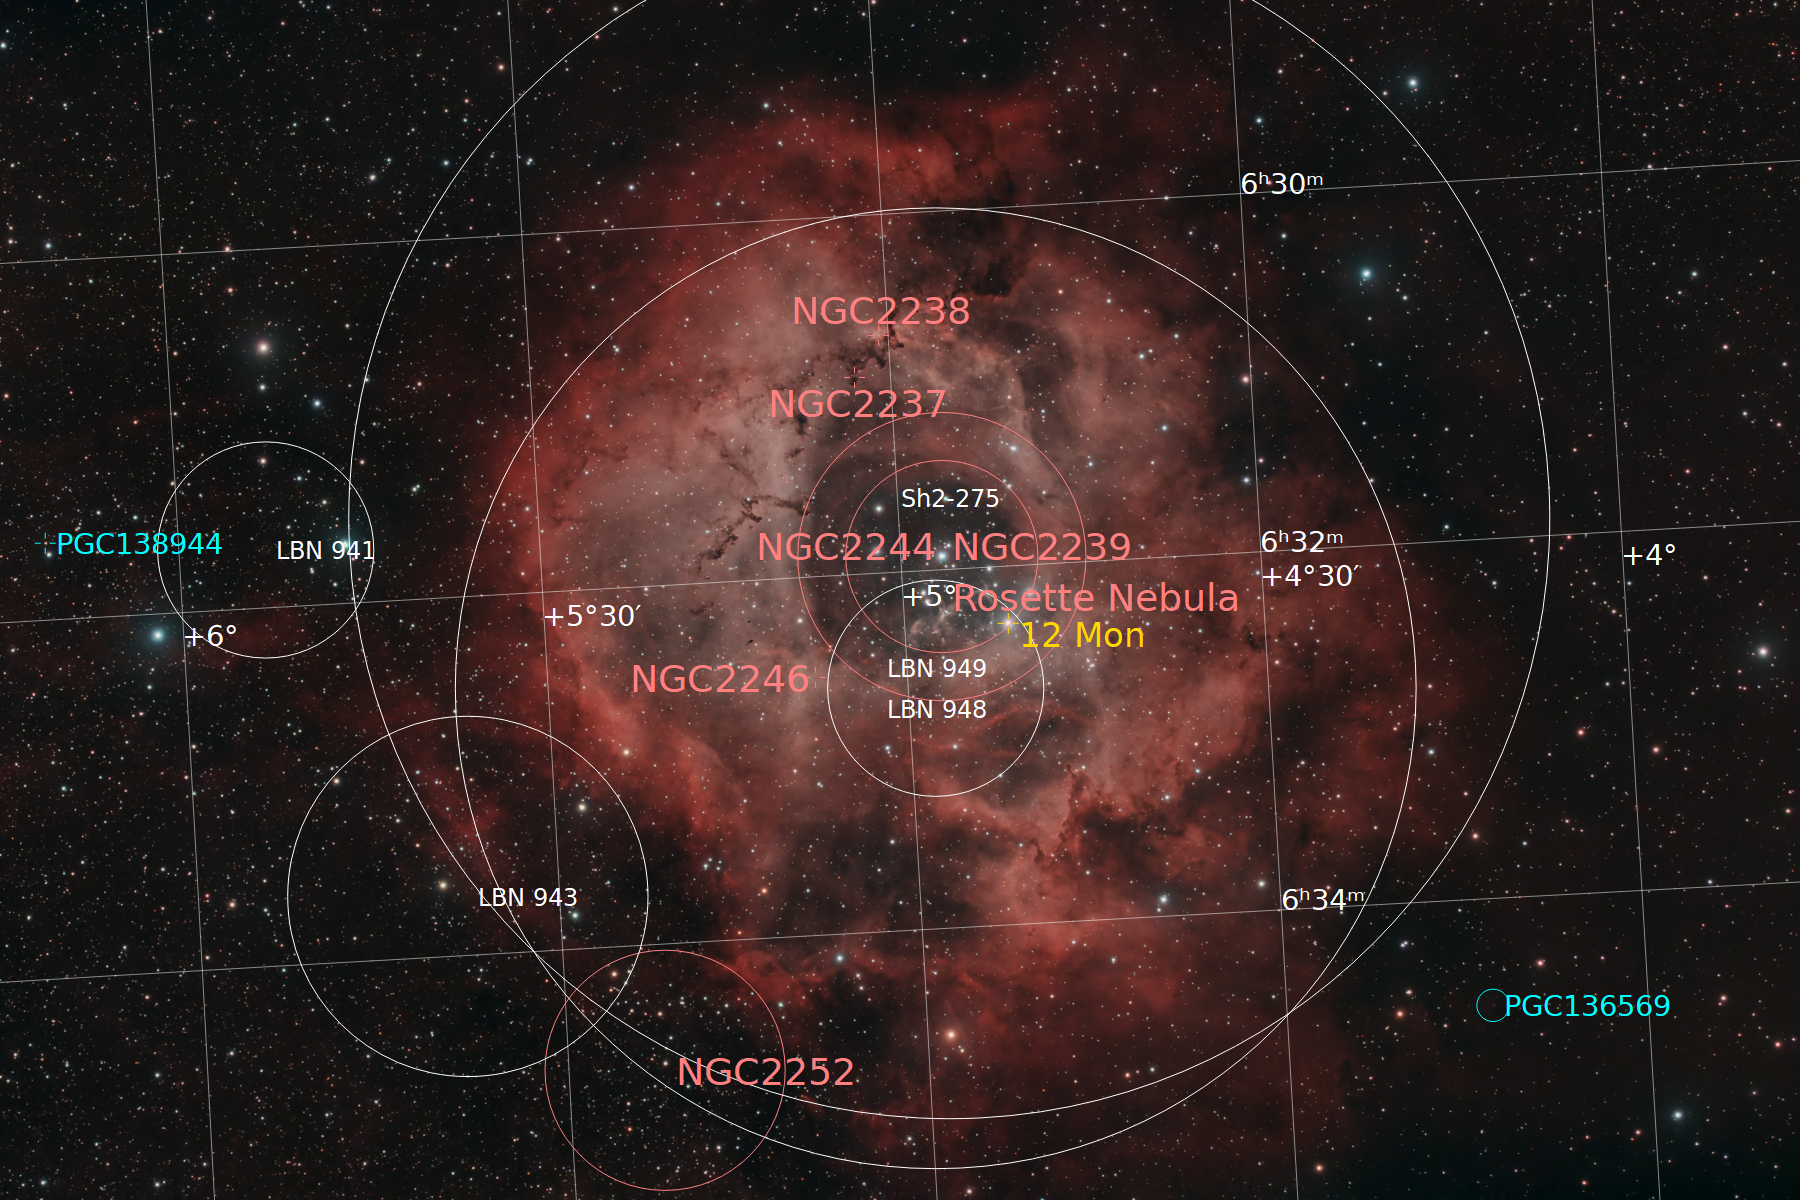 Annotated image